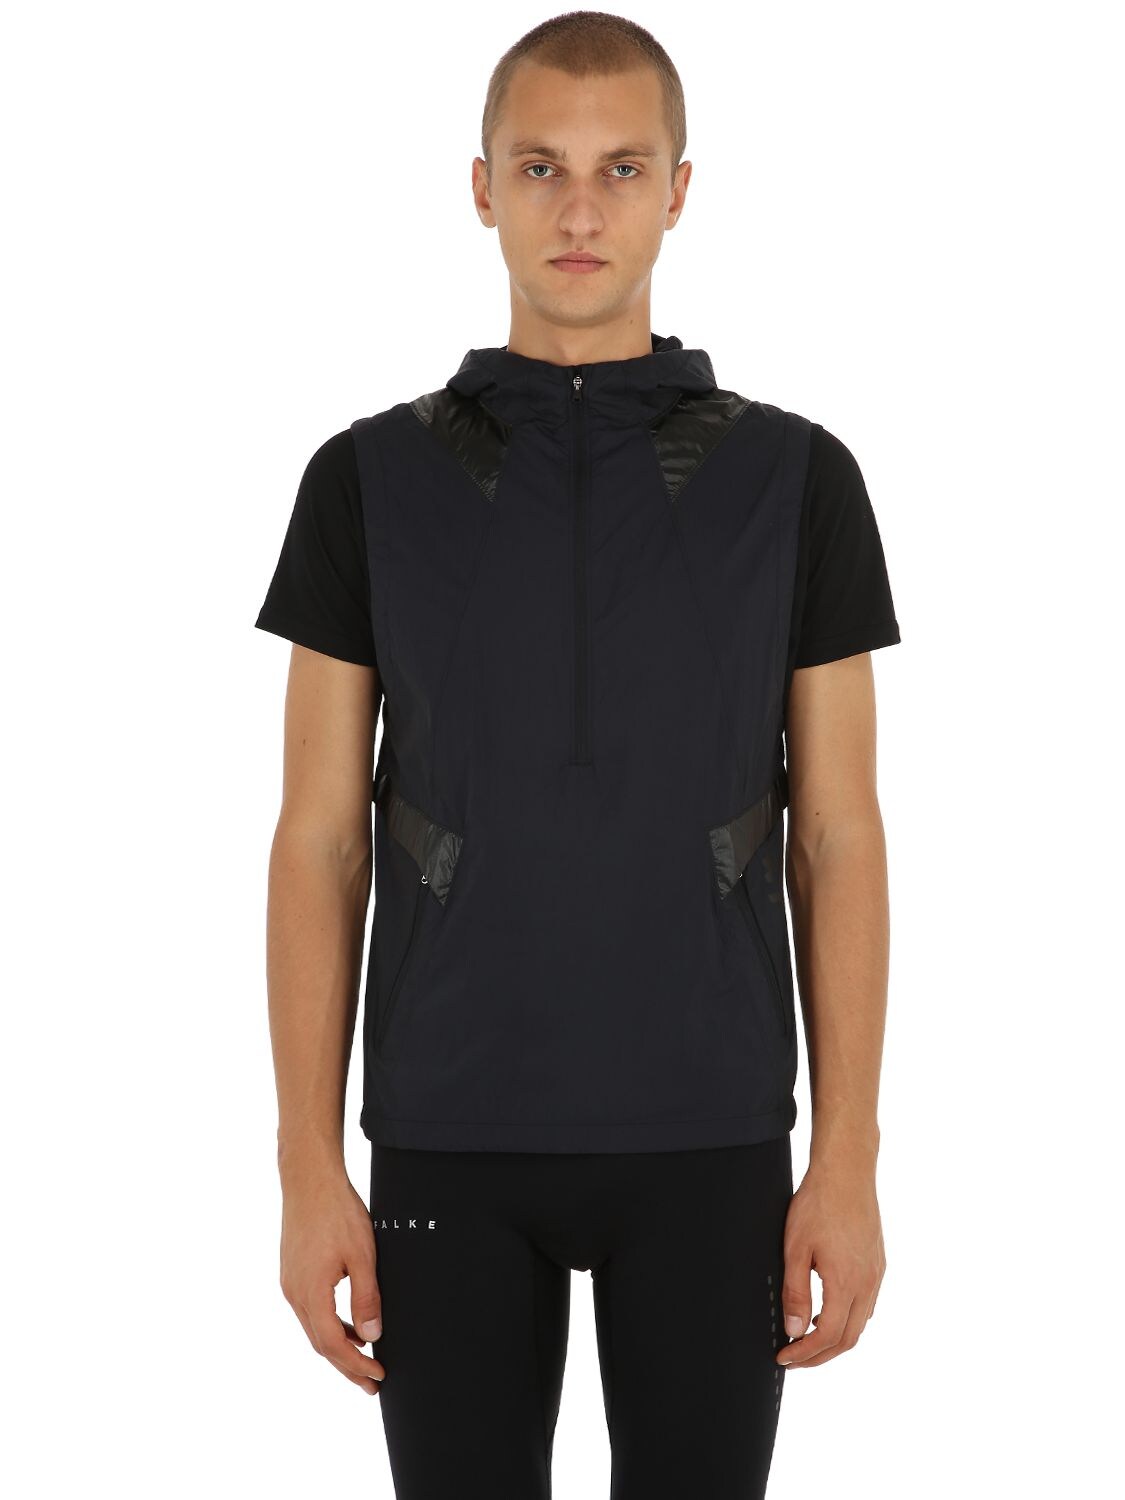 Under Armour Perpetual Performance Vest In Black